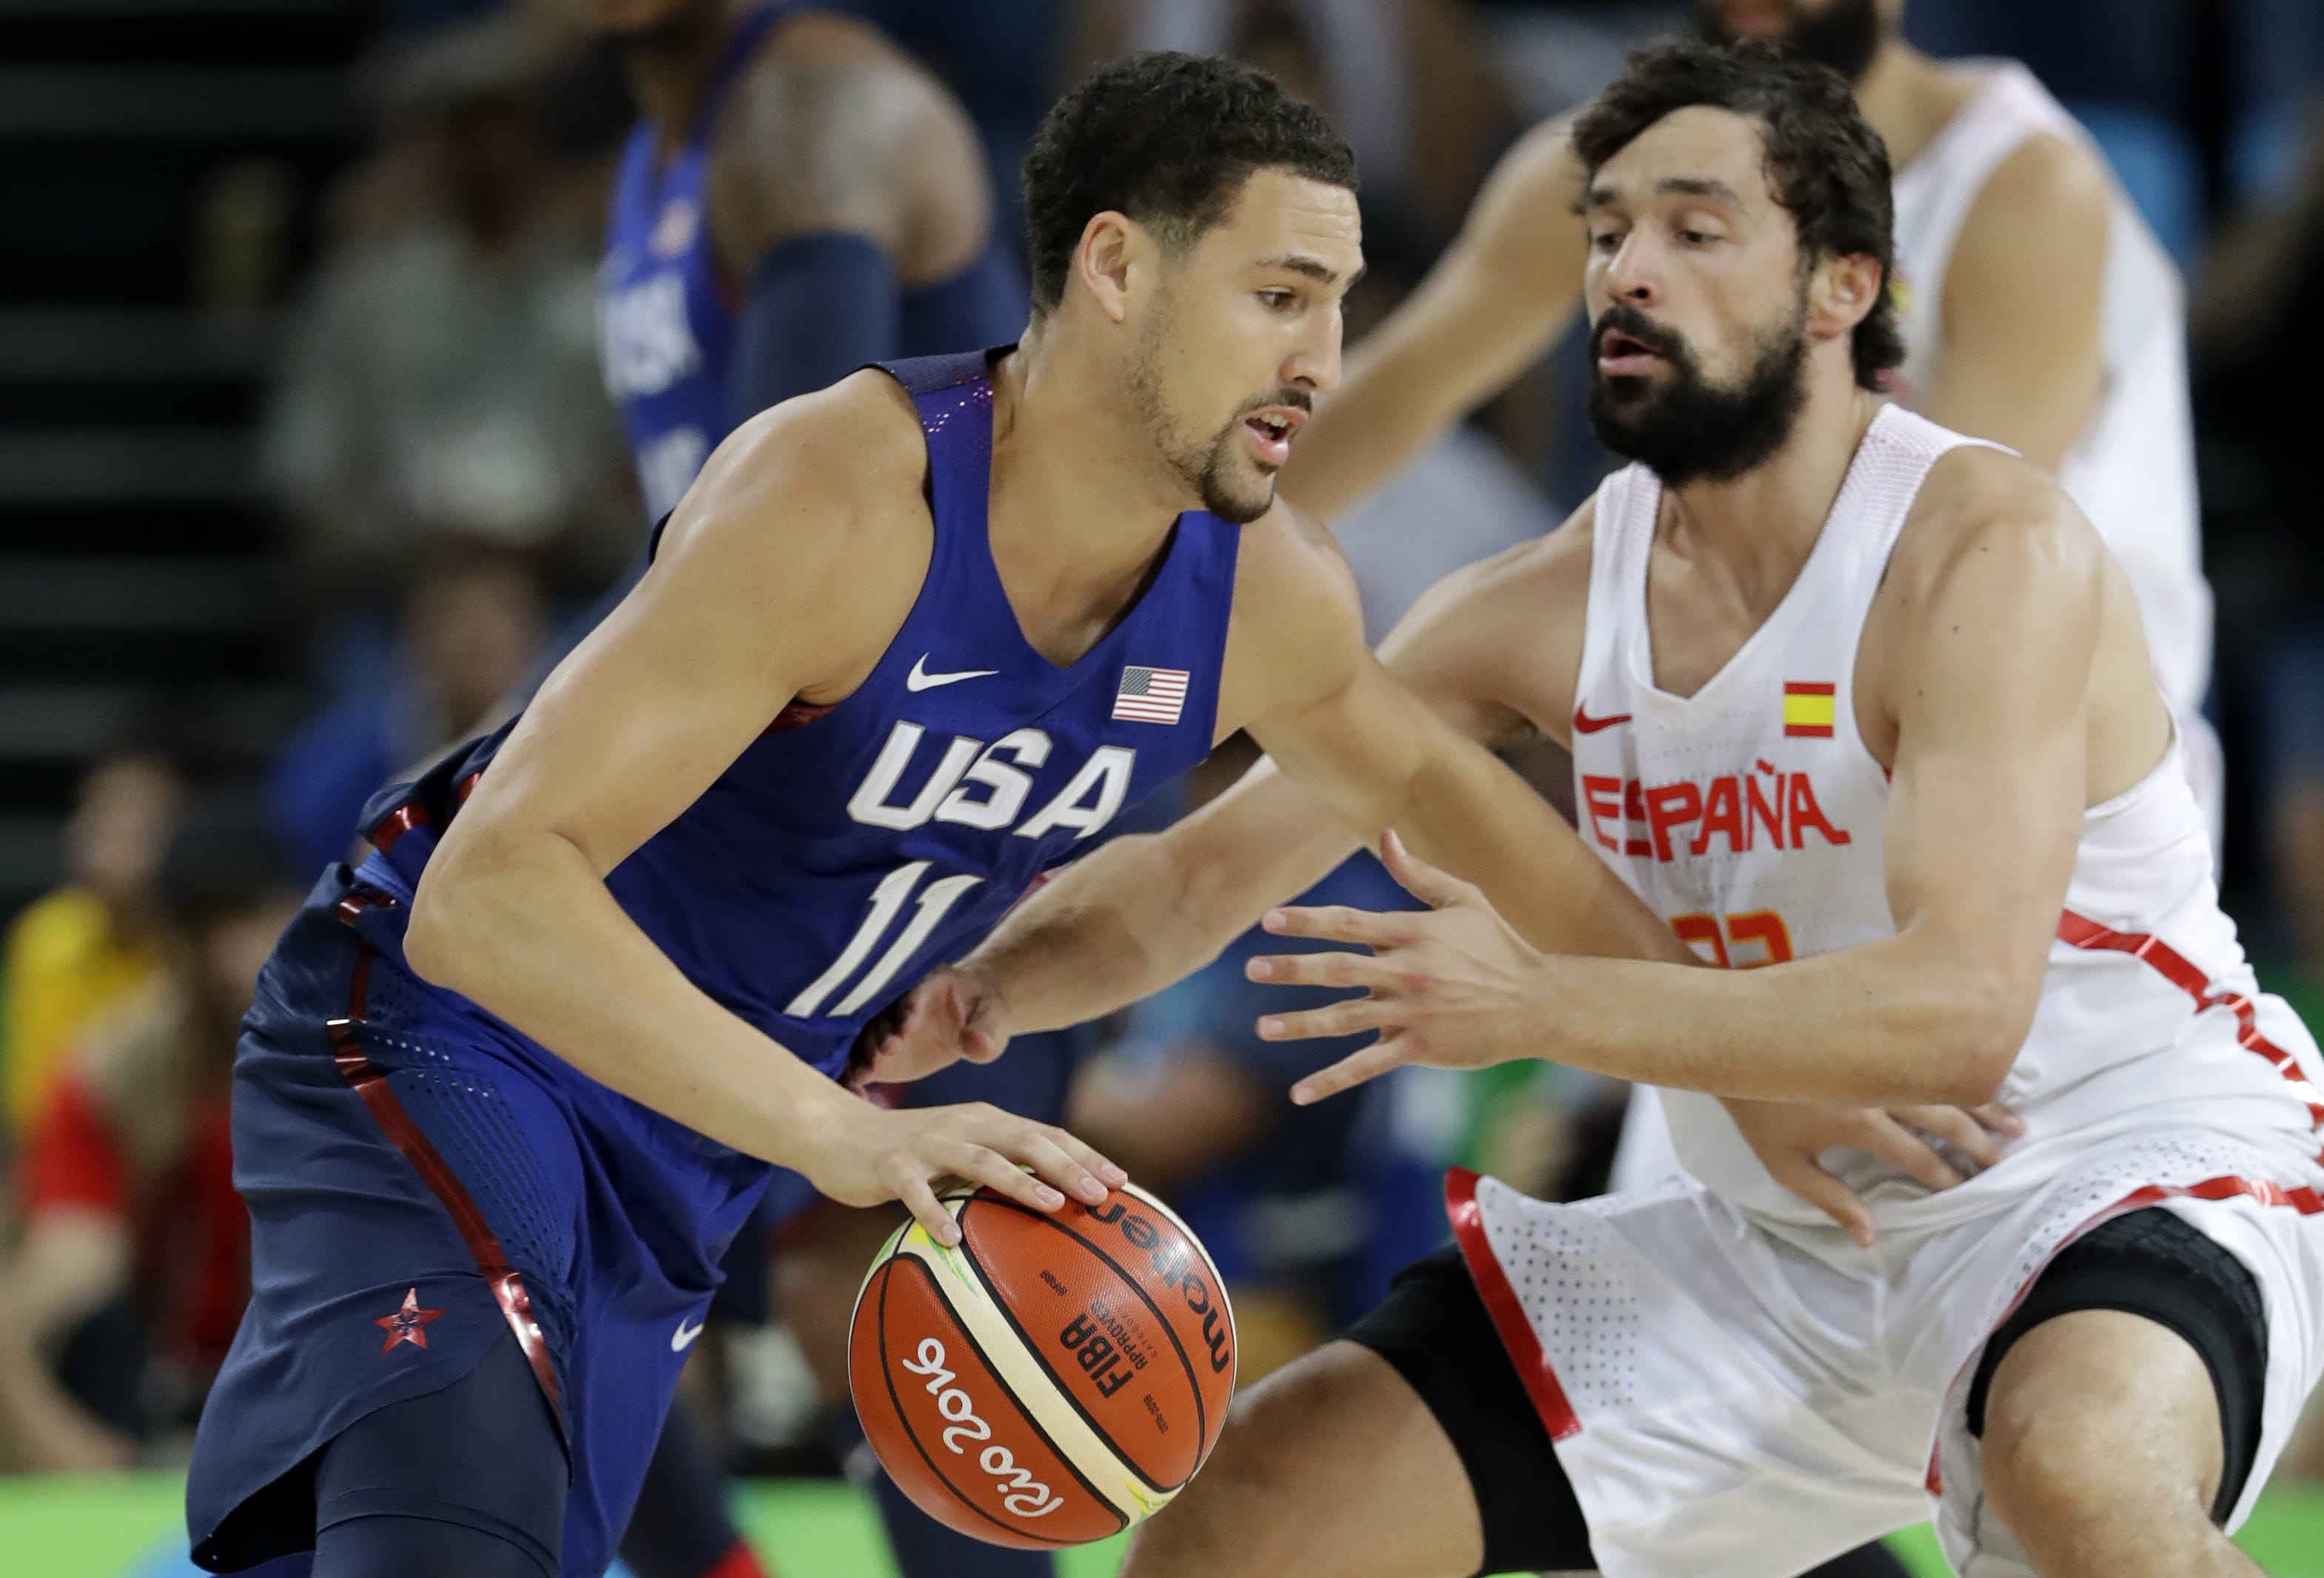 United States' Klay Thompson (11) drives past Spain's Sergio Llull, right, during a semifinal round basketball game at the 2016 Summer Olympics in Rio de Janeiro, Brazil, Friday, Aug. 19, 2016.